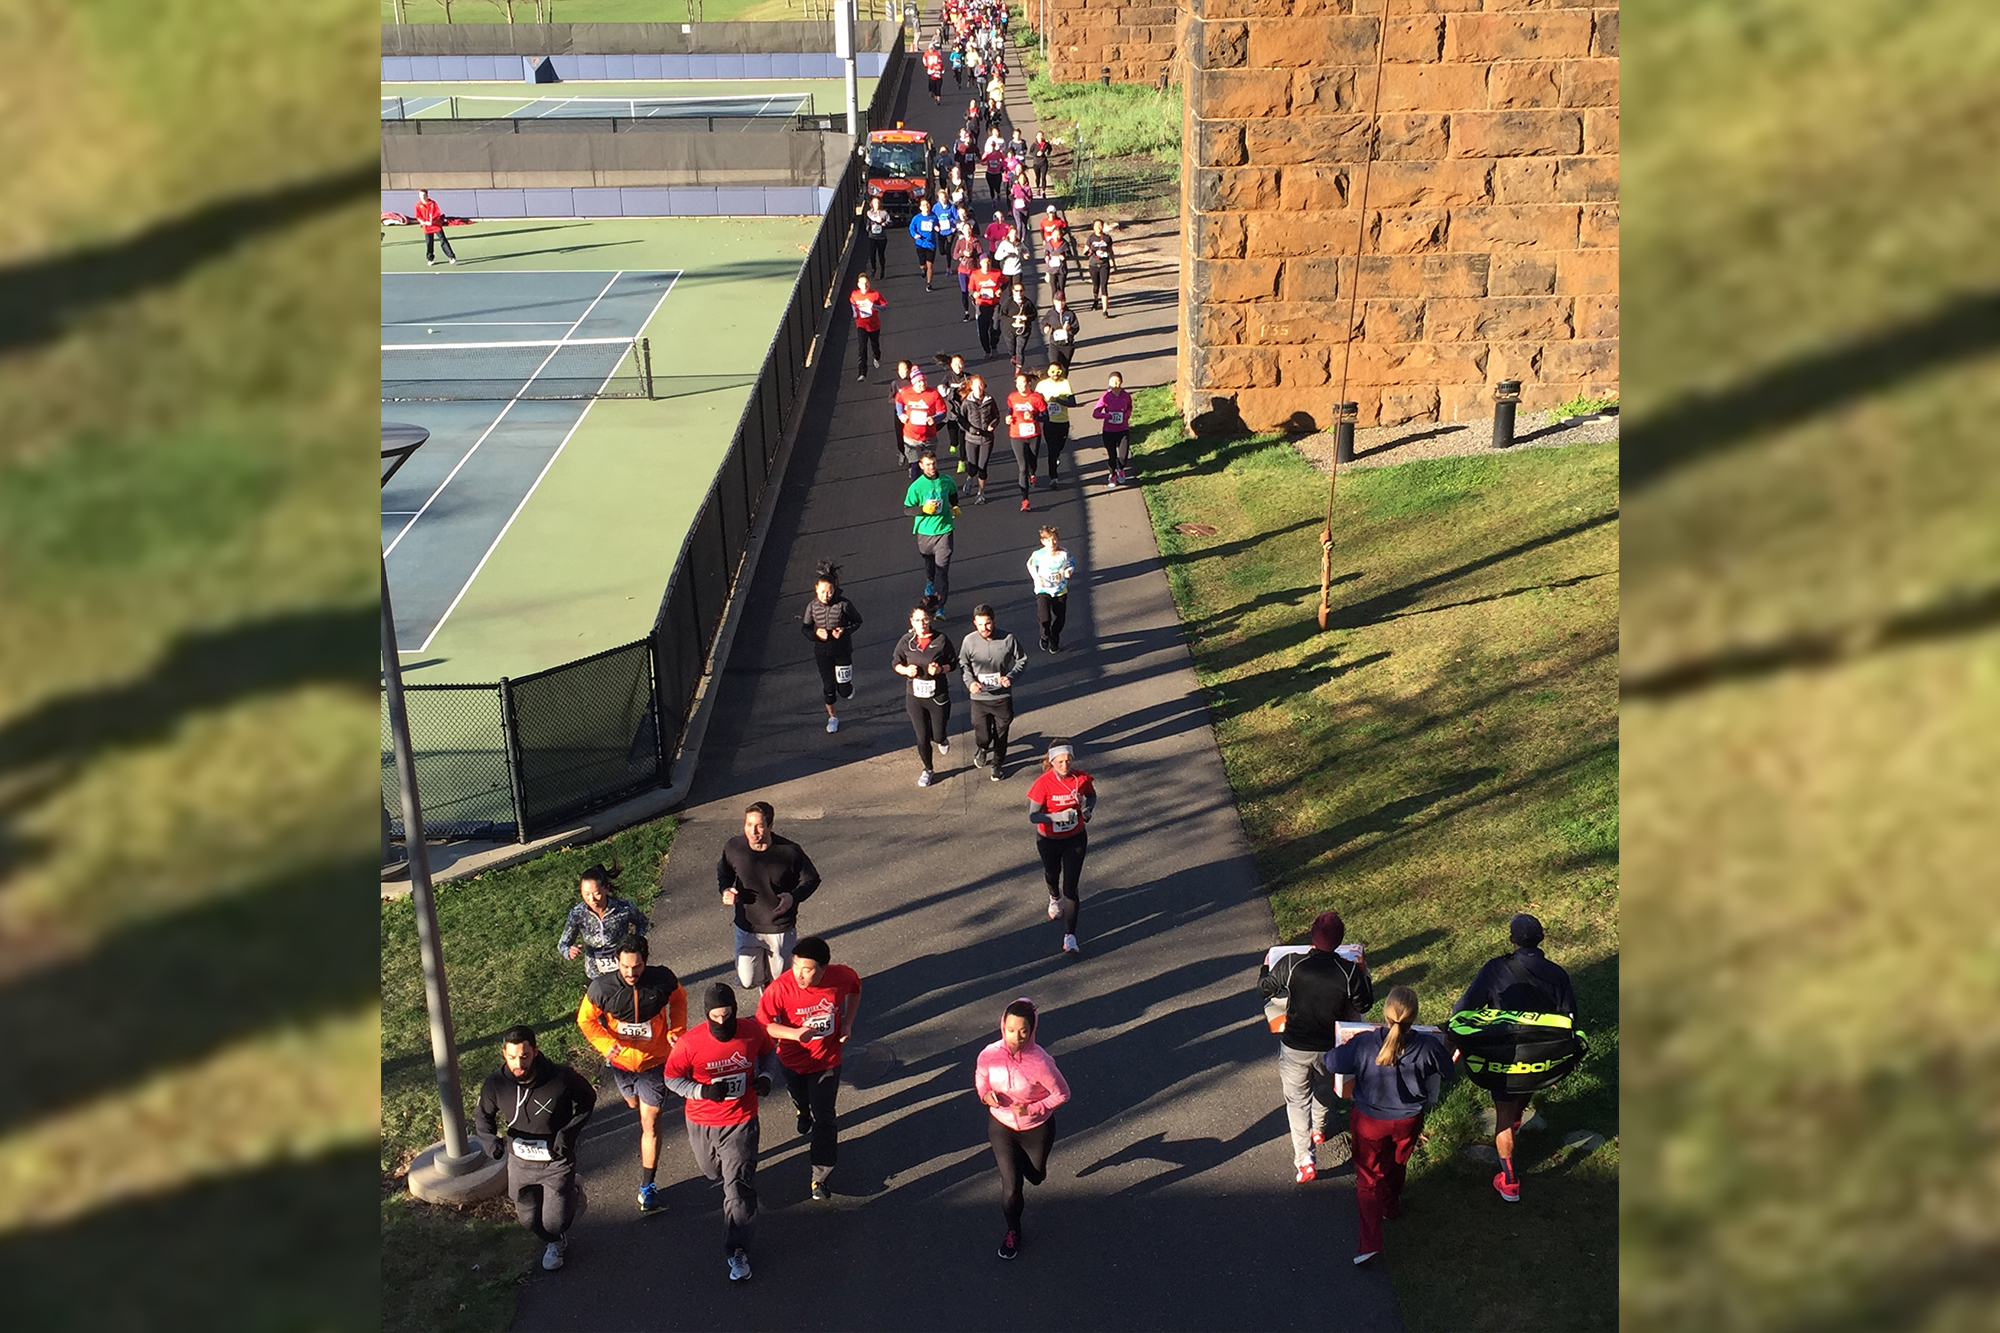 Aerial view of runners along a street with tennis courts on one side.